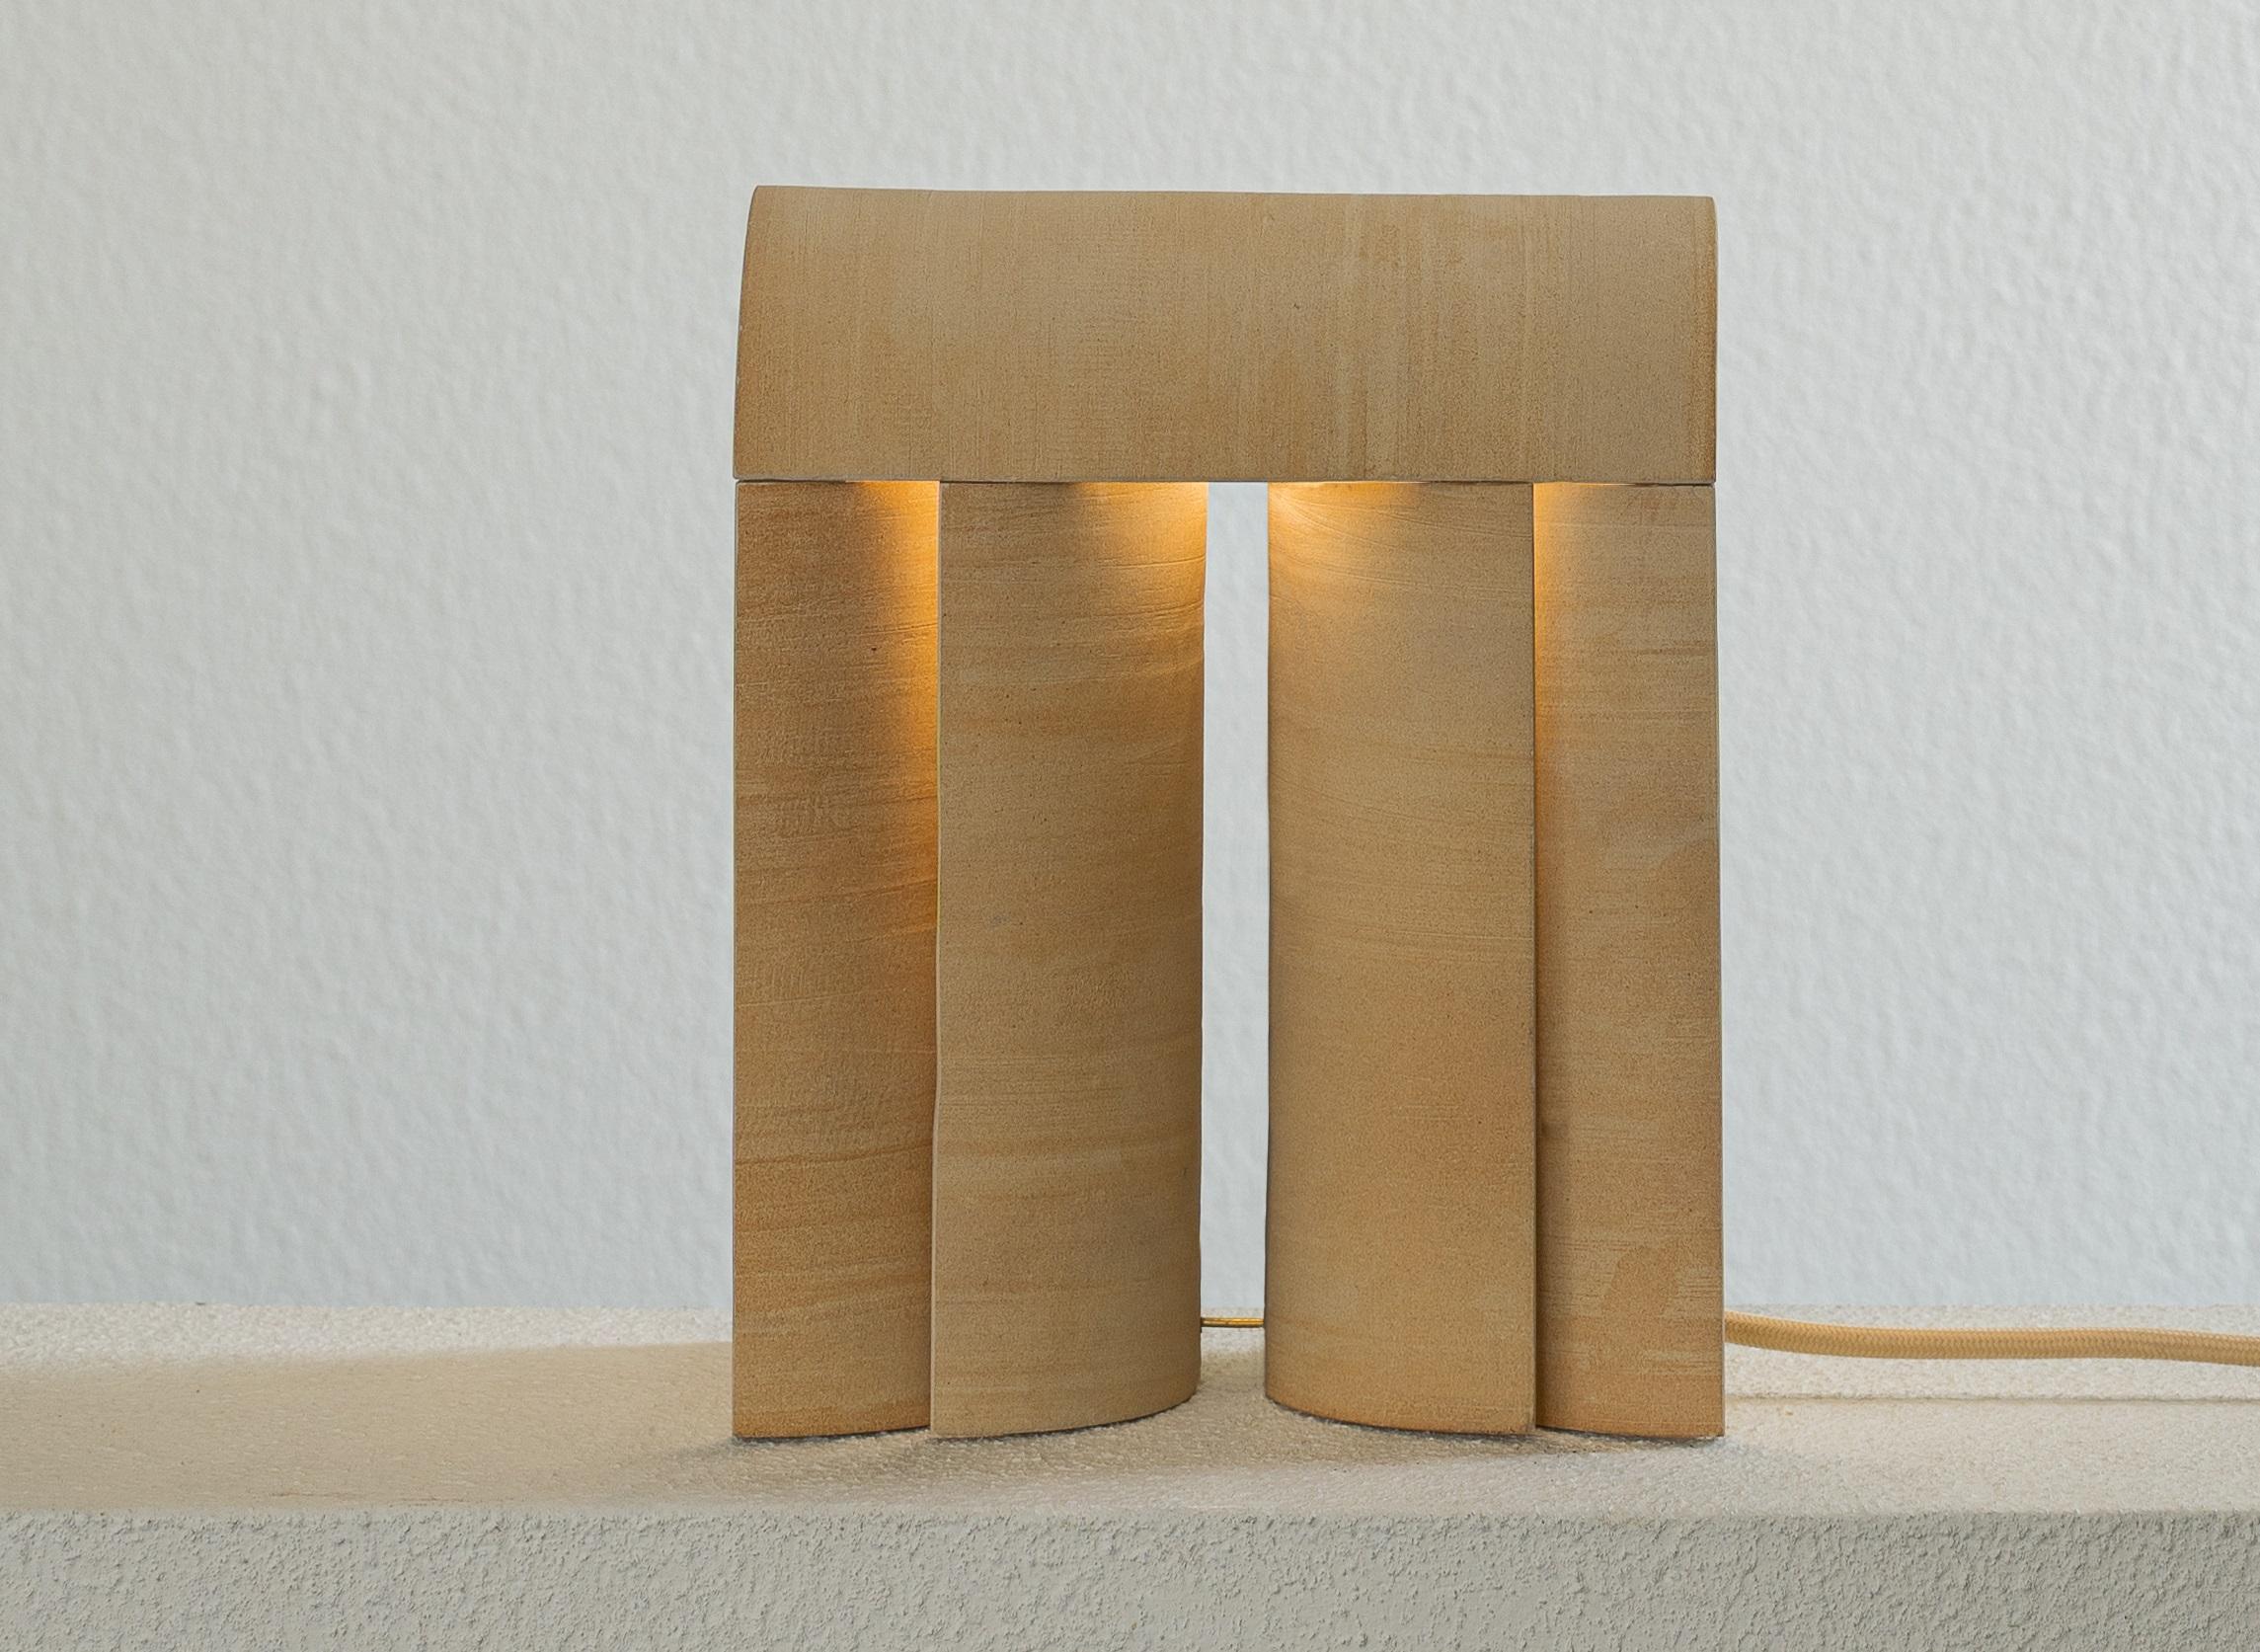 Layers of III lamp by Evelina Kudabaite 
Materials: Stoneware
Dimensions: D 12 x W 20 x H 24 cm.
One of a kind.
Small and large sizes available. 
All our lamps can be wired according to each country. If sold to the USA it will be wired for the